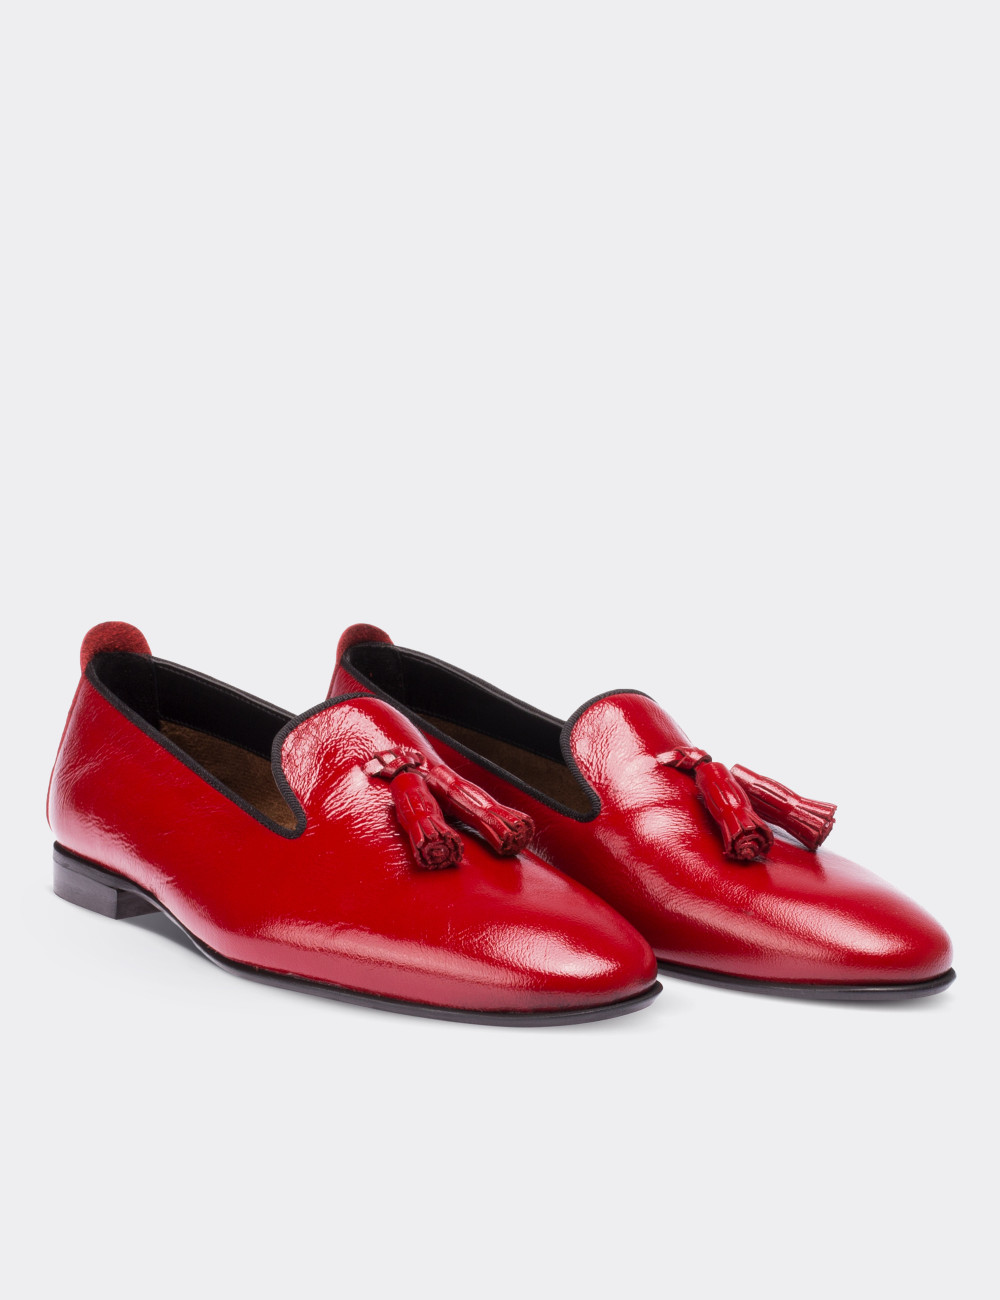 Red Patent Leather Loafers - 01613ZKRMM01